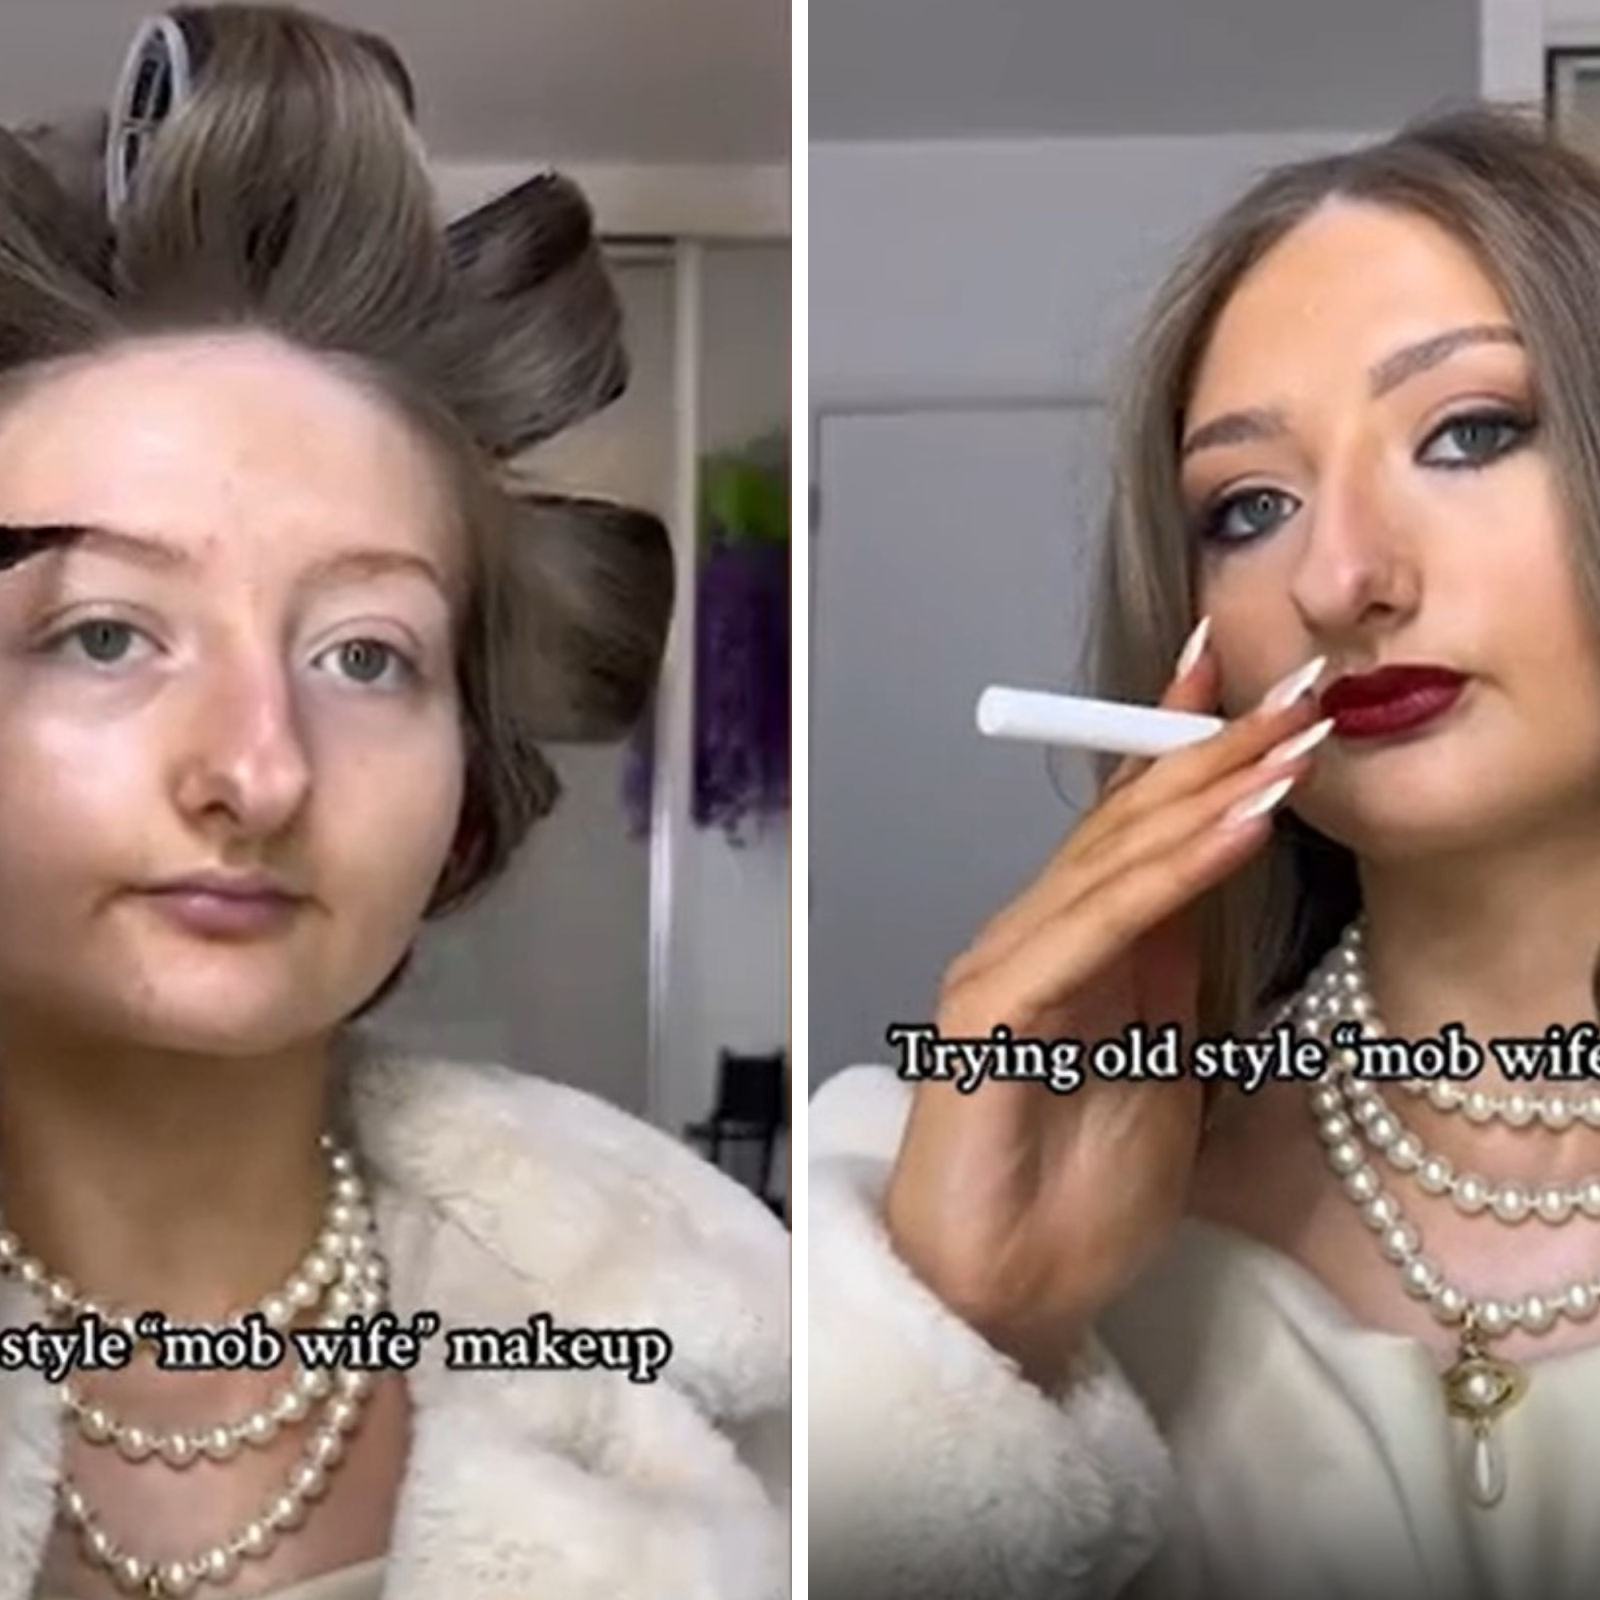 Mob Wife Makeup & Aesthetic Trend That's Taken Over TikTok, Explained